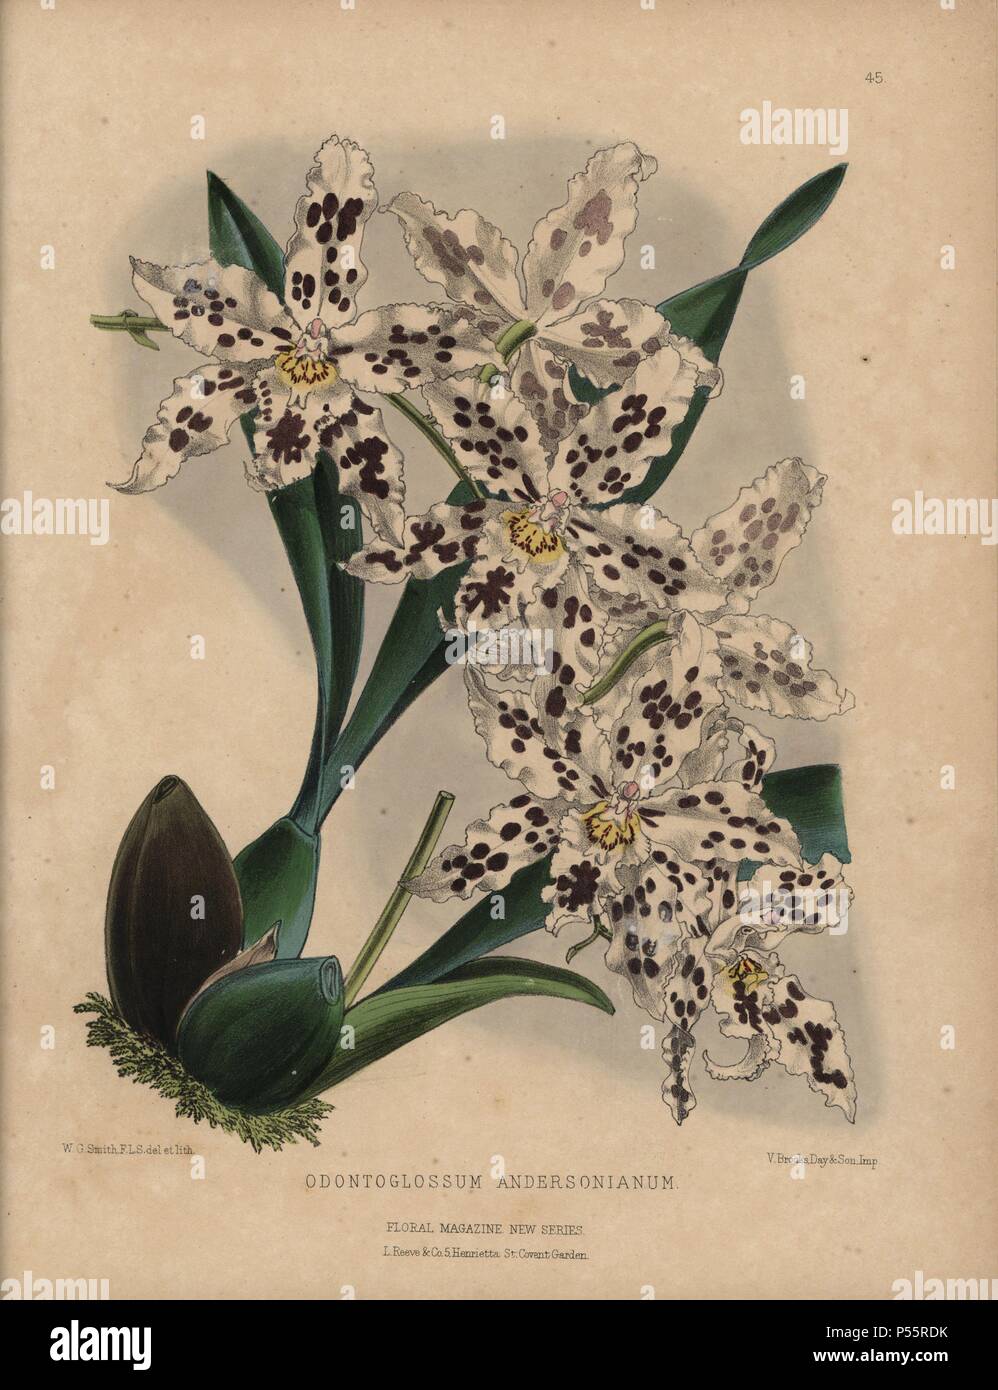 Hybrid odontoglossum orchid with white flowers dotted with purple.. Odontoglossum andersonianum. Handcolored botanical drawn and lithographed by W.G. Smith from H.H. Dombrain's 'Floral Magazine' 1872.. Worthington G. Smith (1835-1917), architect, engraver and mycologist. Smith also illustrated 'The Gardener's Chronicle.' Henry Honywood Dombrain (1818-1905), clergyman gardener, was editor of the 'Floral Magazine' from 1862 to 1873. Stock Photo